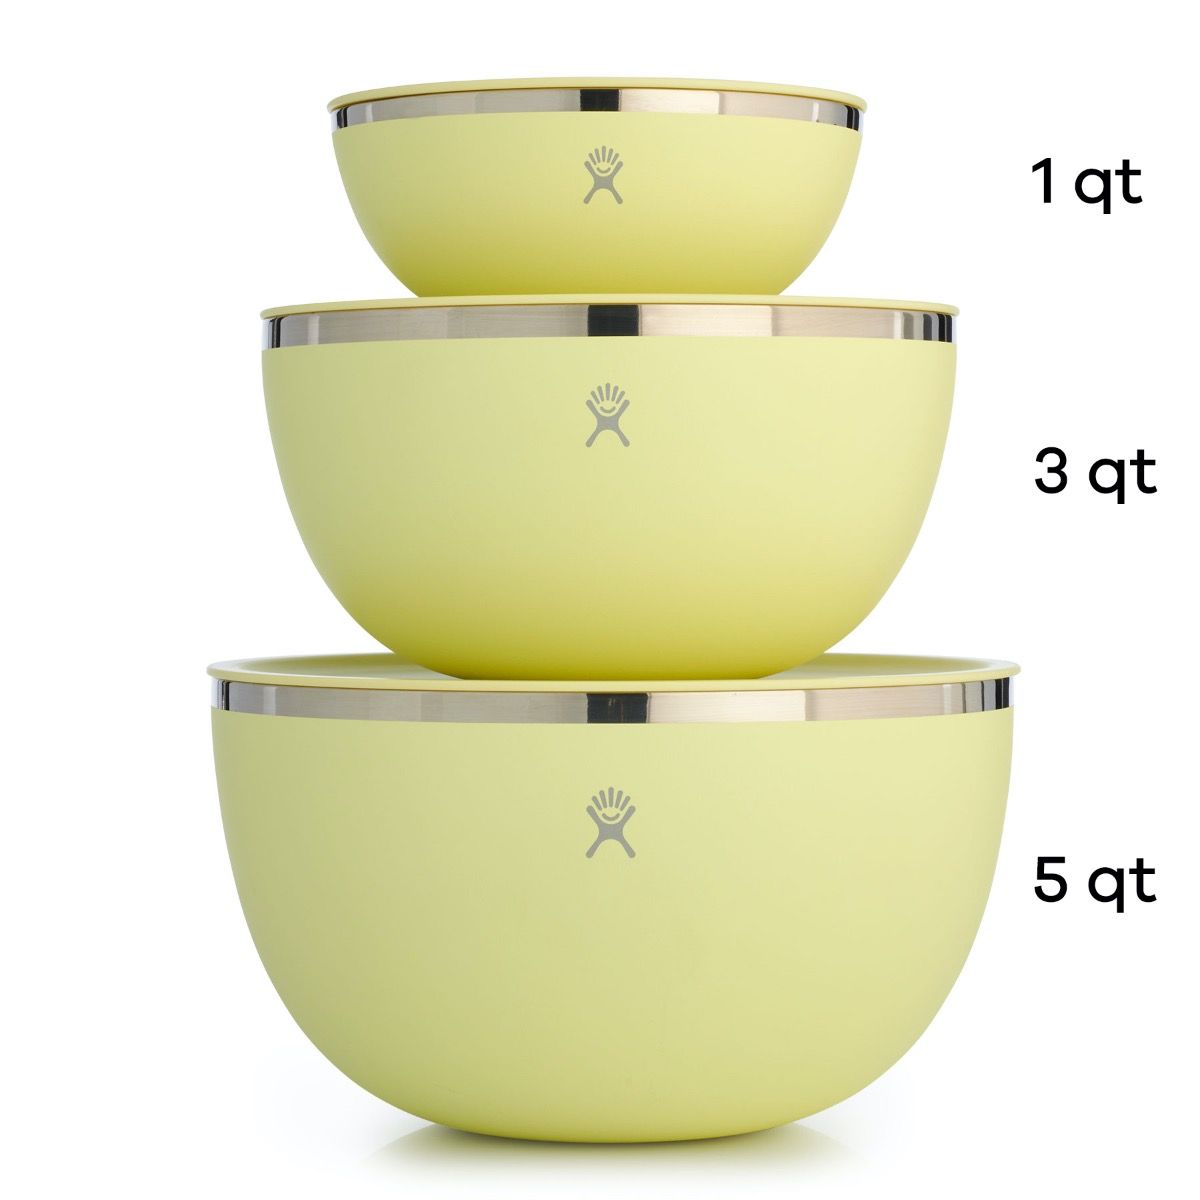 Hydro Flask Outdoor Kitchen 3qt Serving Bowl with Lid #HeyLetsGo 